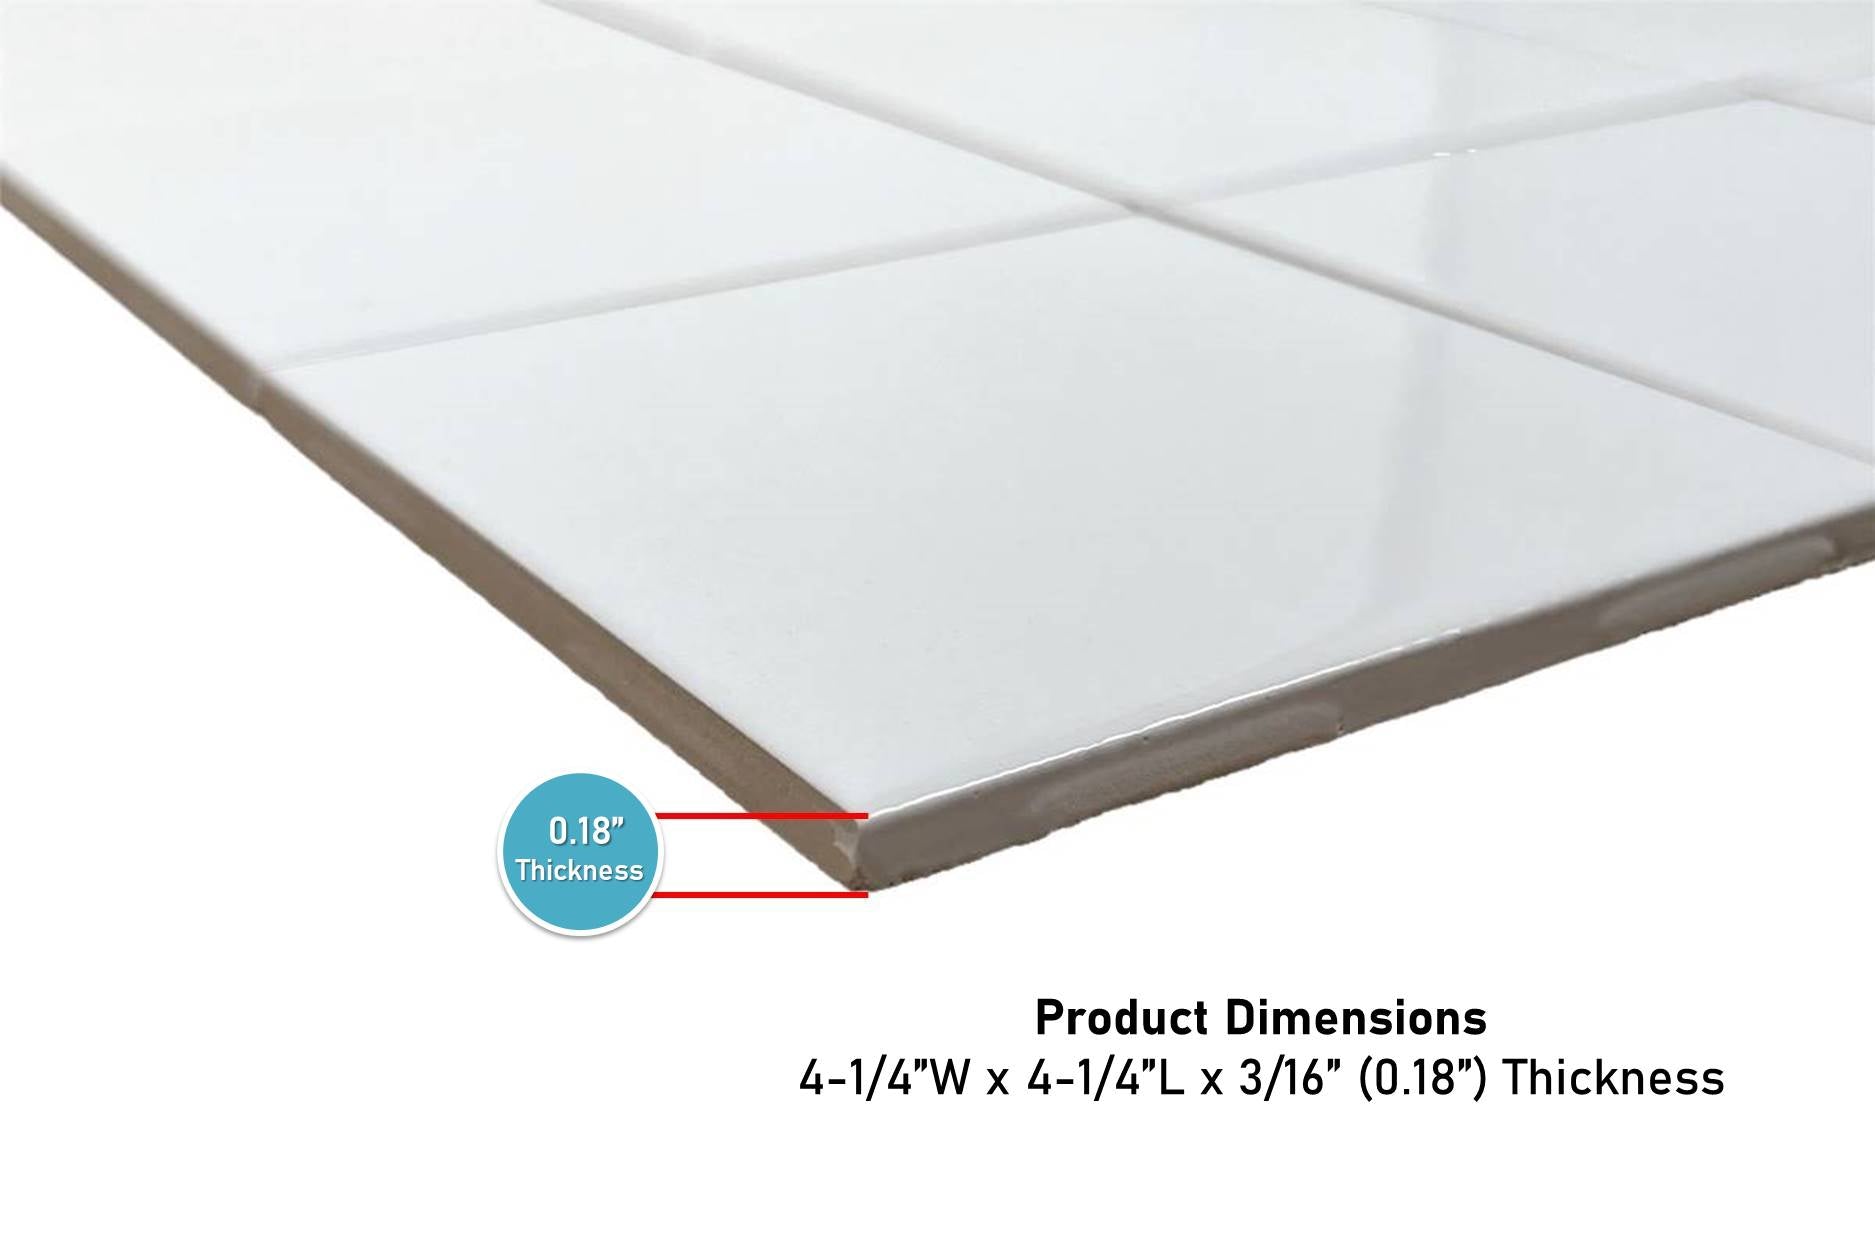 4 in White Ceramic Tile Gloss 4 1/4" Box of 10 Piece for Bathroom Wall and Kitchen Backsplash